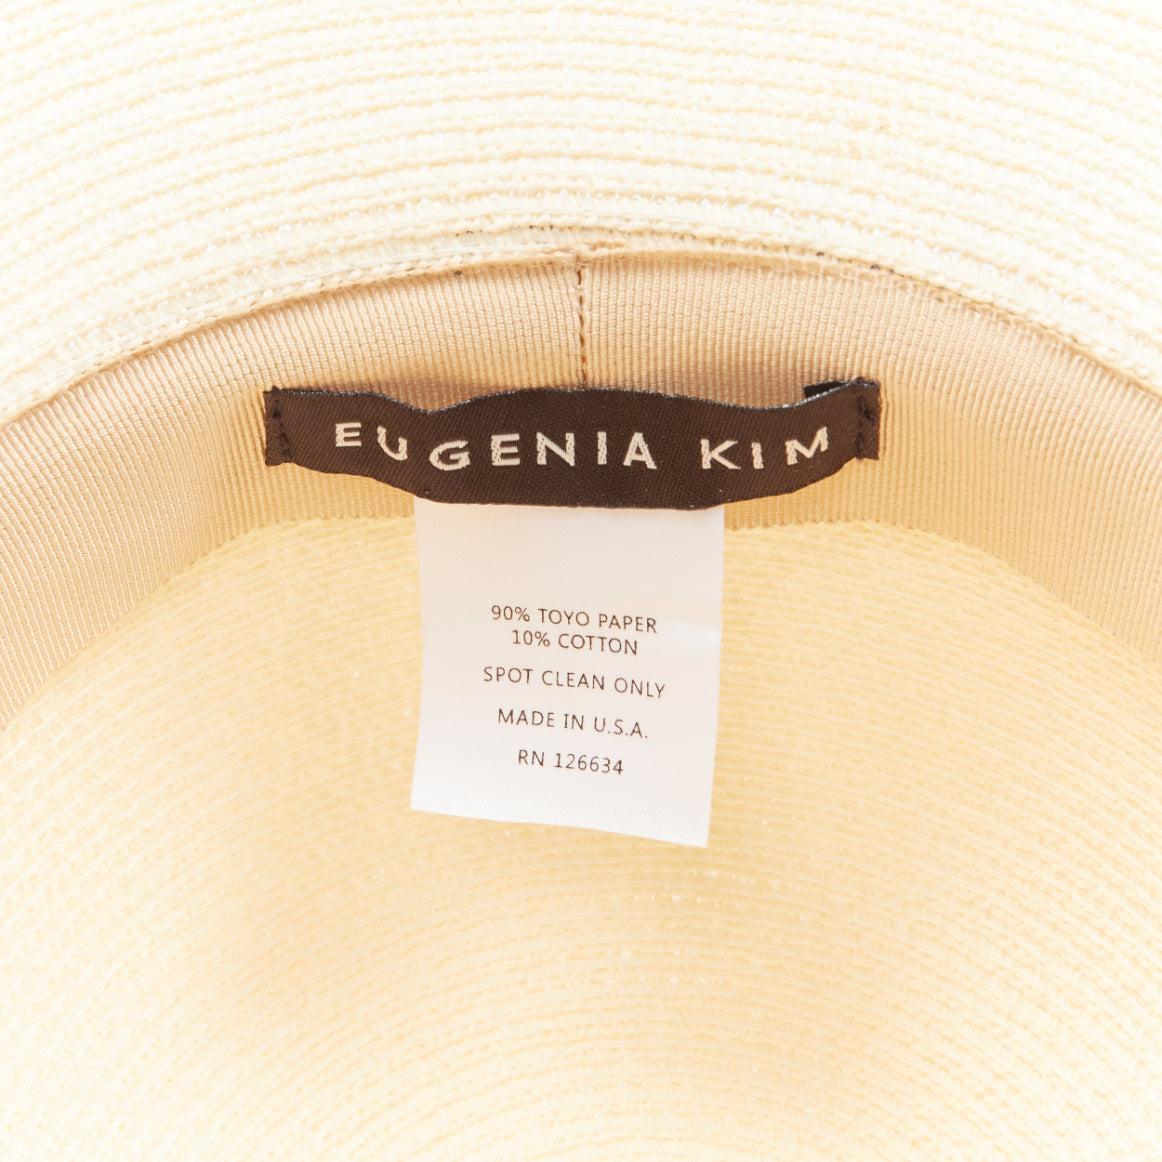 EUGENIA KIM blue sequins Wish You Were Here beige toyo paper cotton sun hat For Sale 4